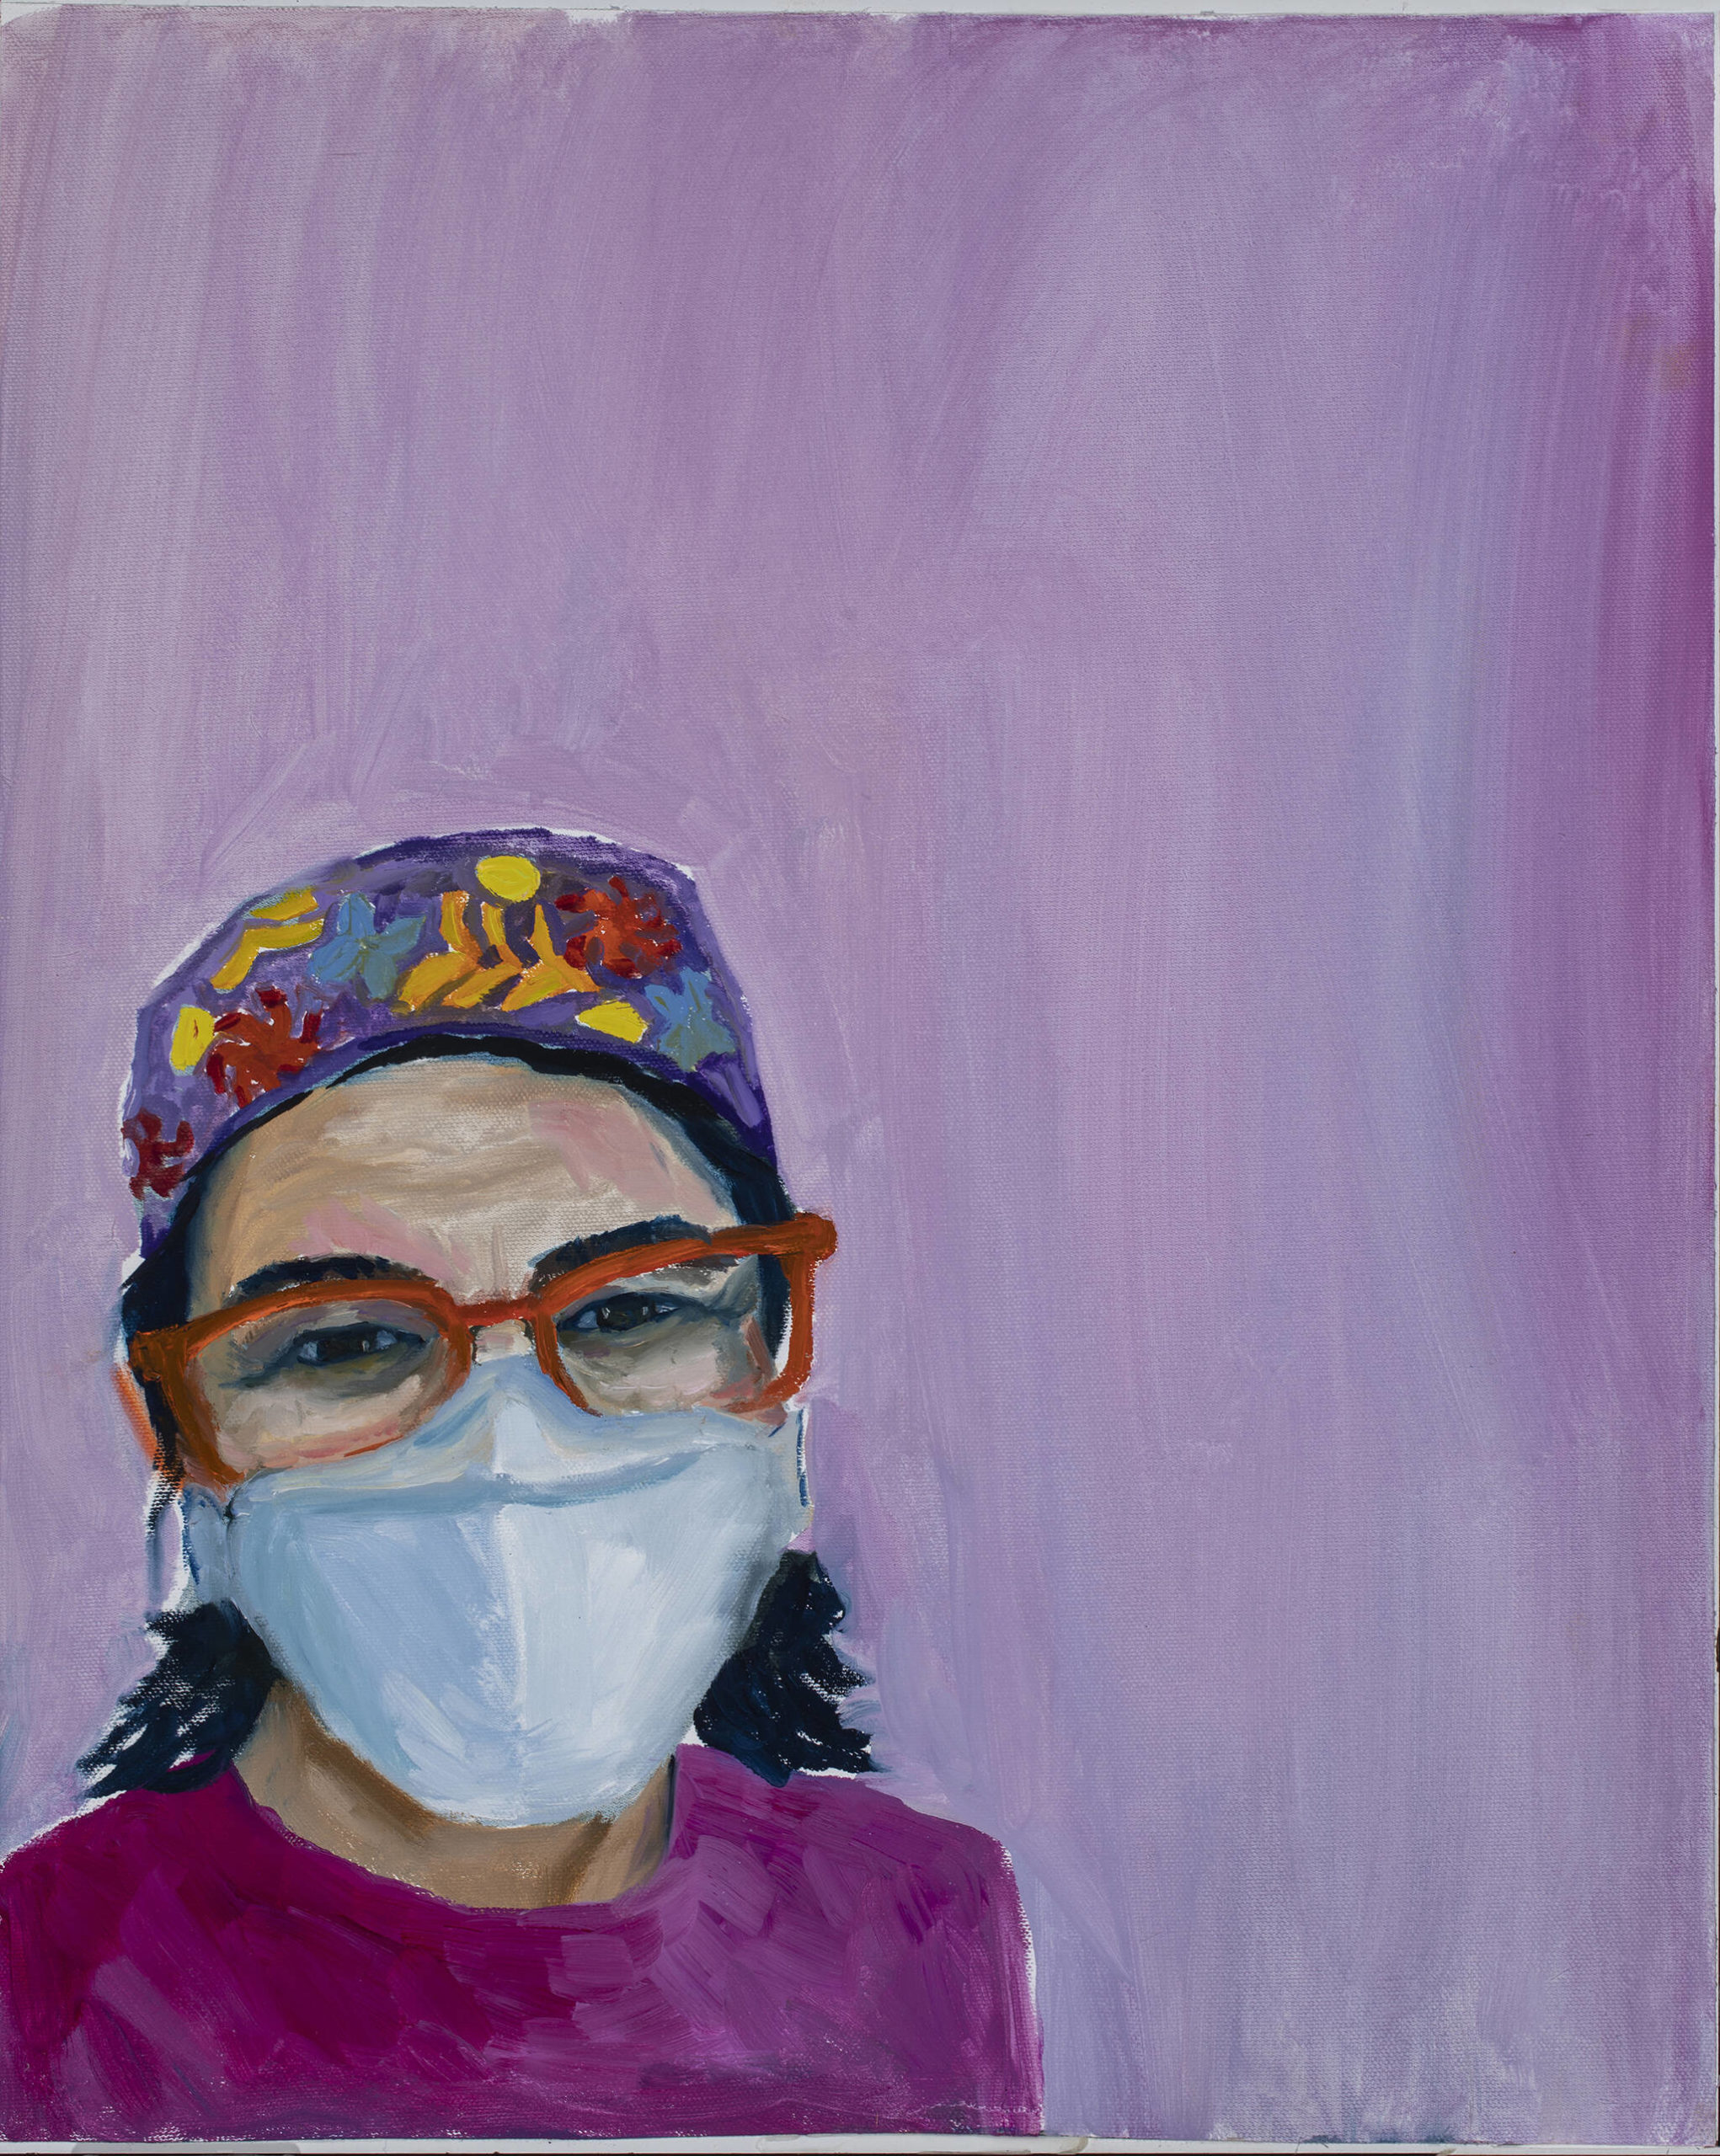 Dr. Sami Ali’s painting of a healthcare worker is part of her show, “The Mind of A Healthcare Worker During the COVID-19 Pandemic,” opening Friday, Jan. 7, 2022, at the Homer Council on the Arts. (Photo by Amber Johnson)